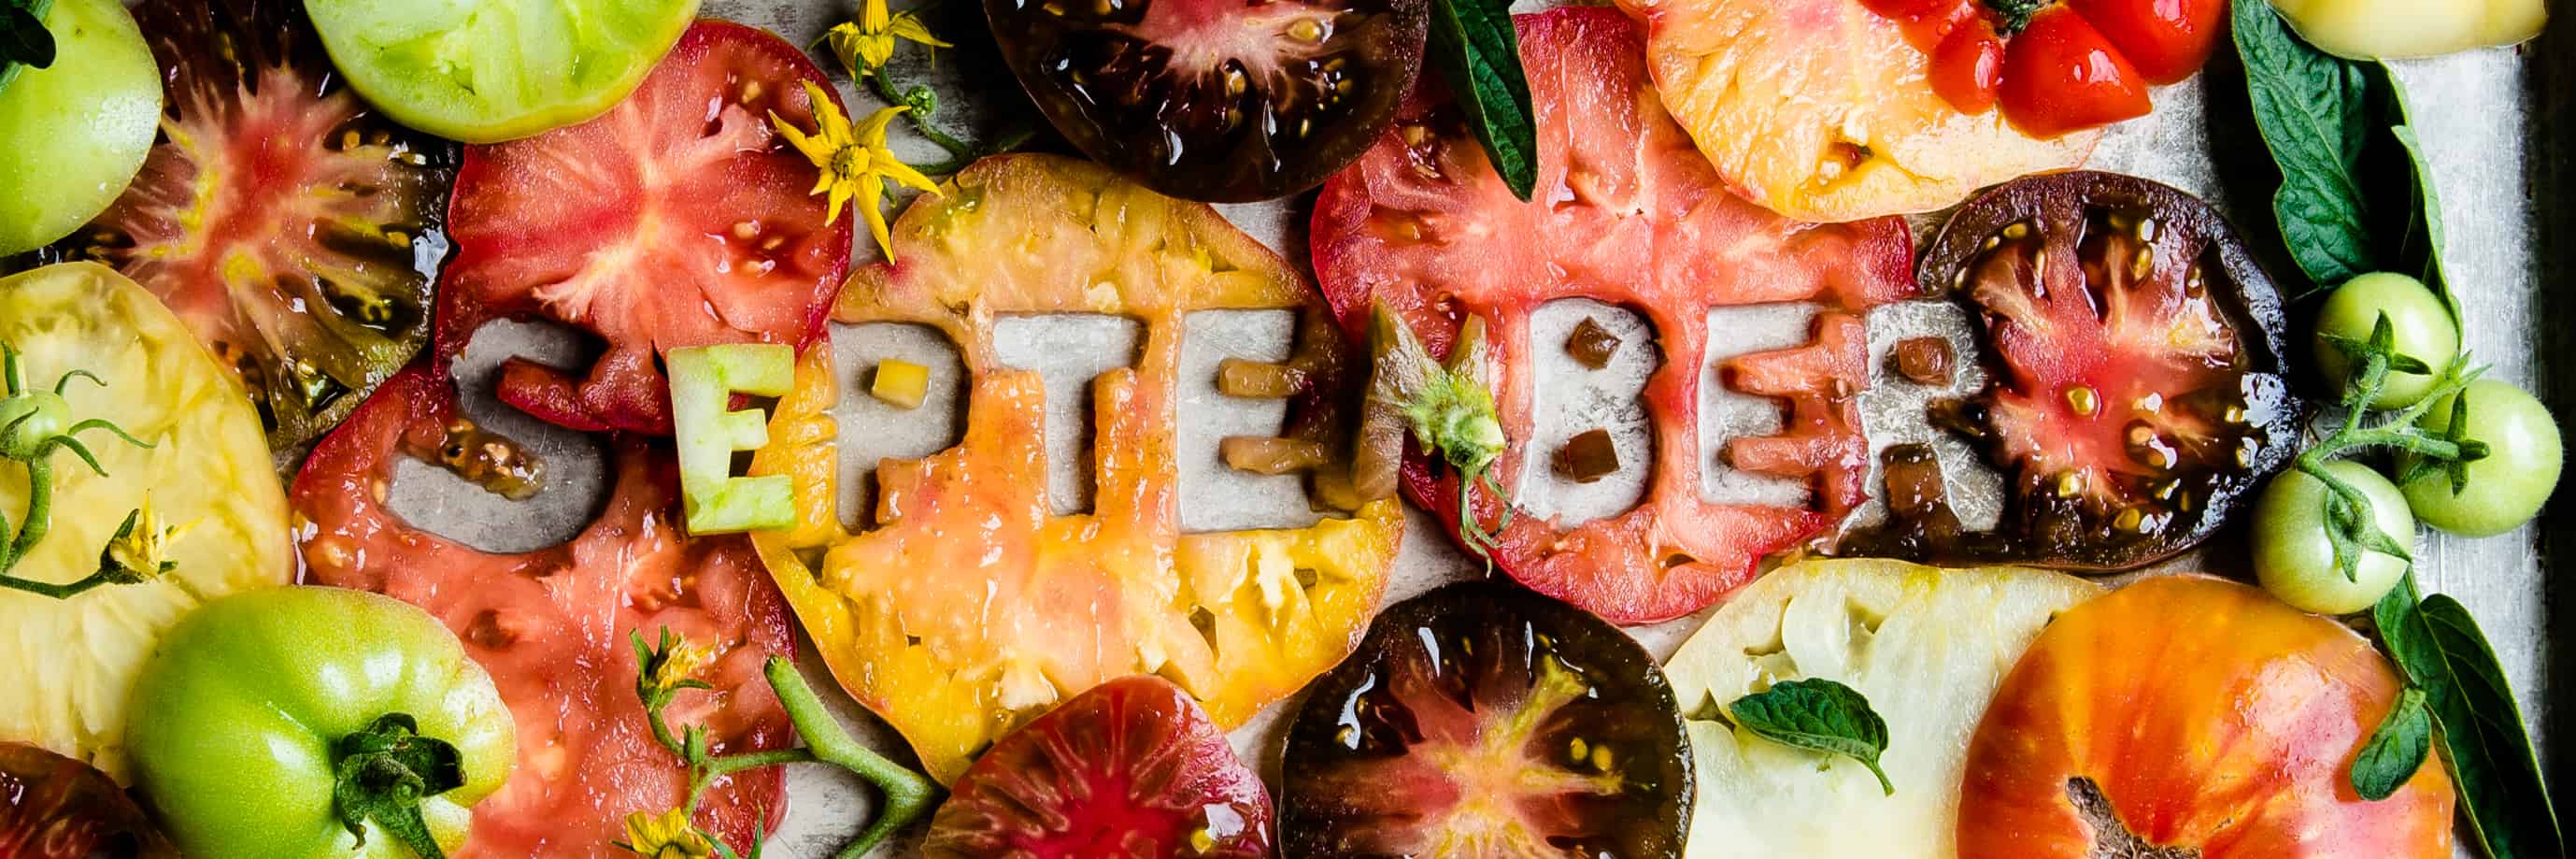 creative food styling banner image of tomatoes that spell out September 